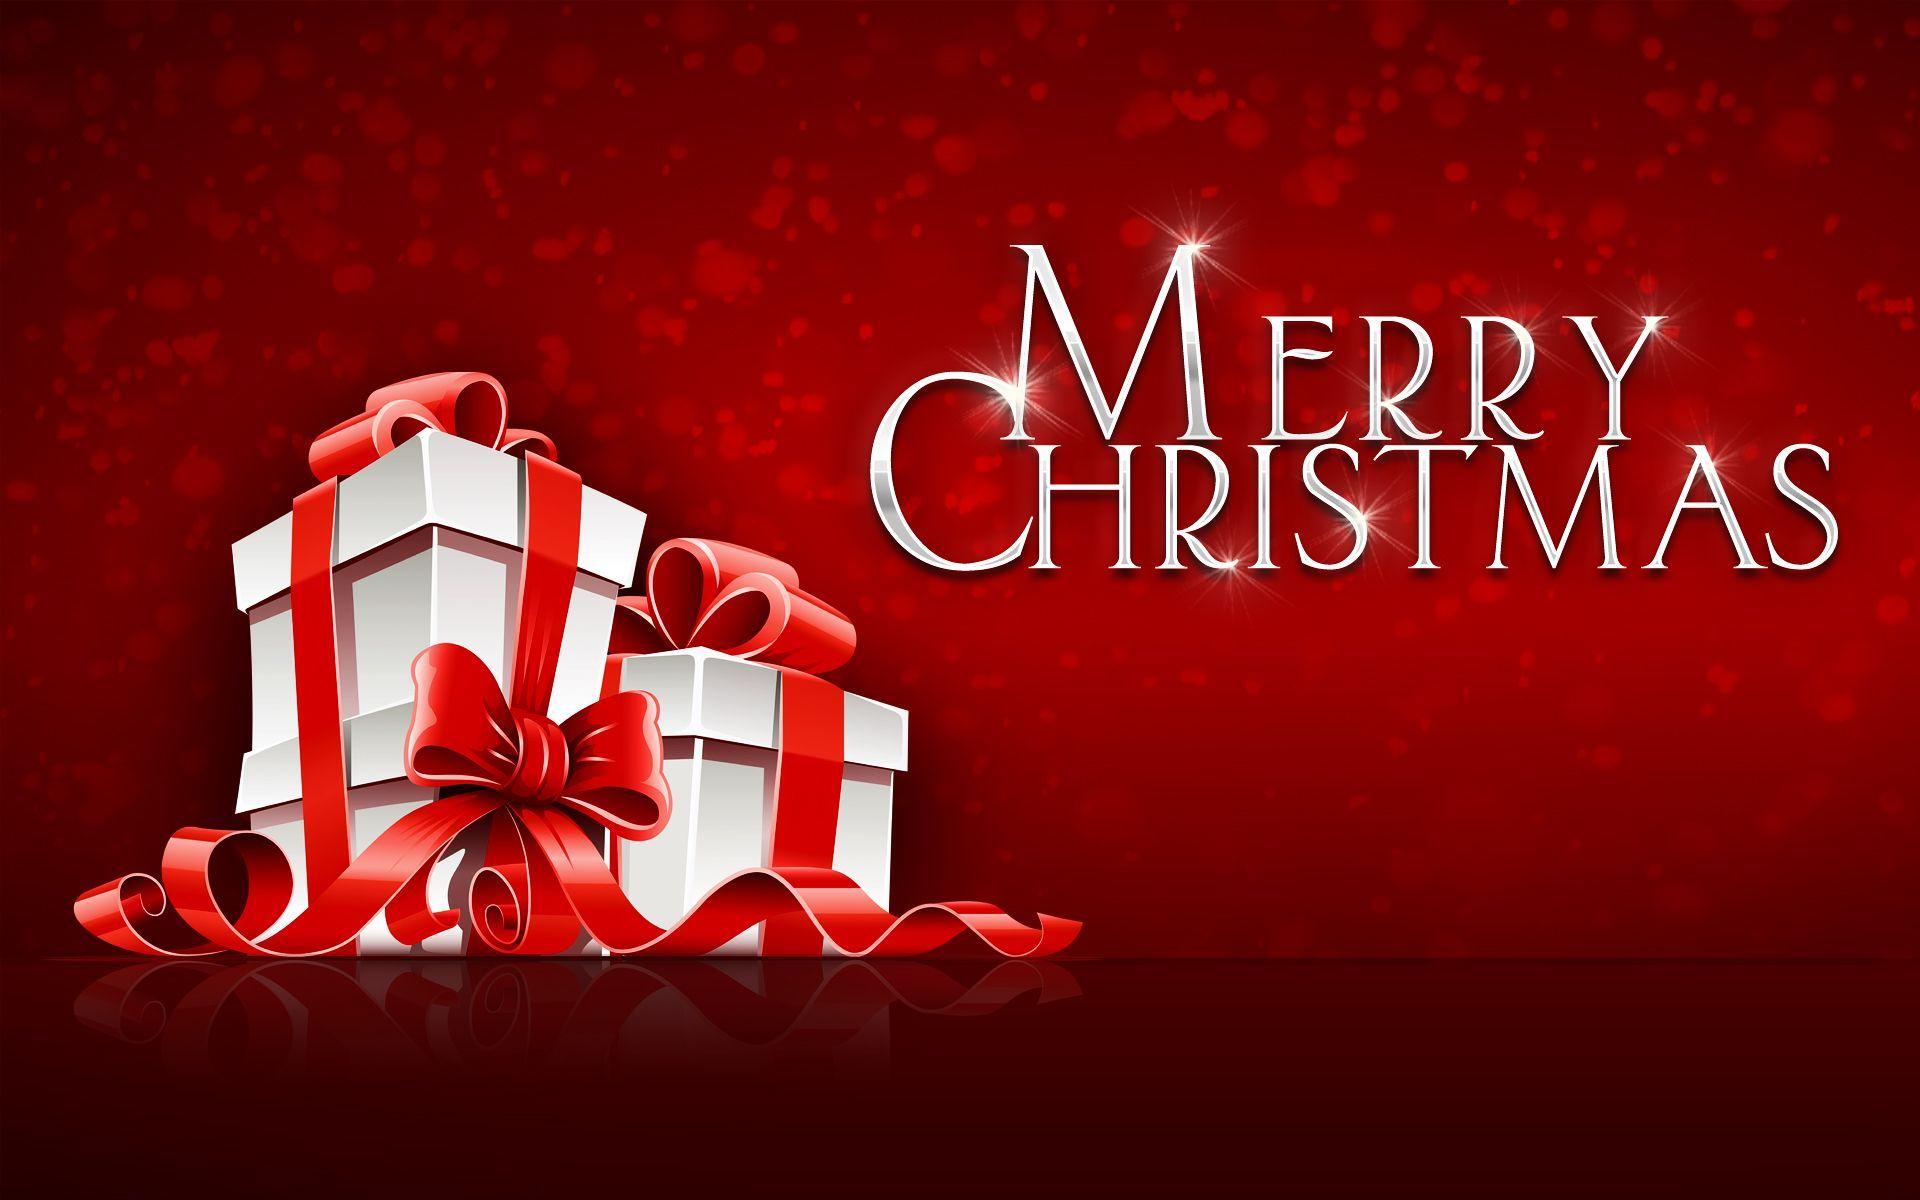 Merry Christmas Wallpaper and Image Download Free Year 2017